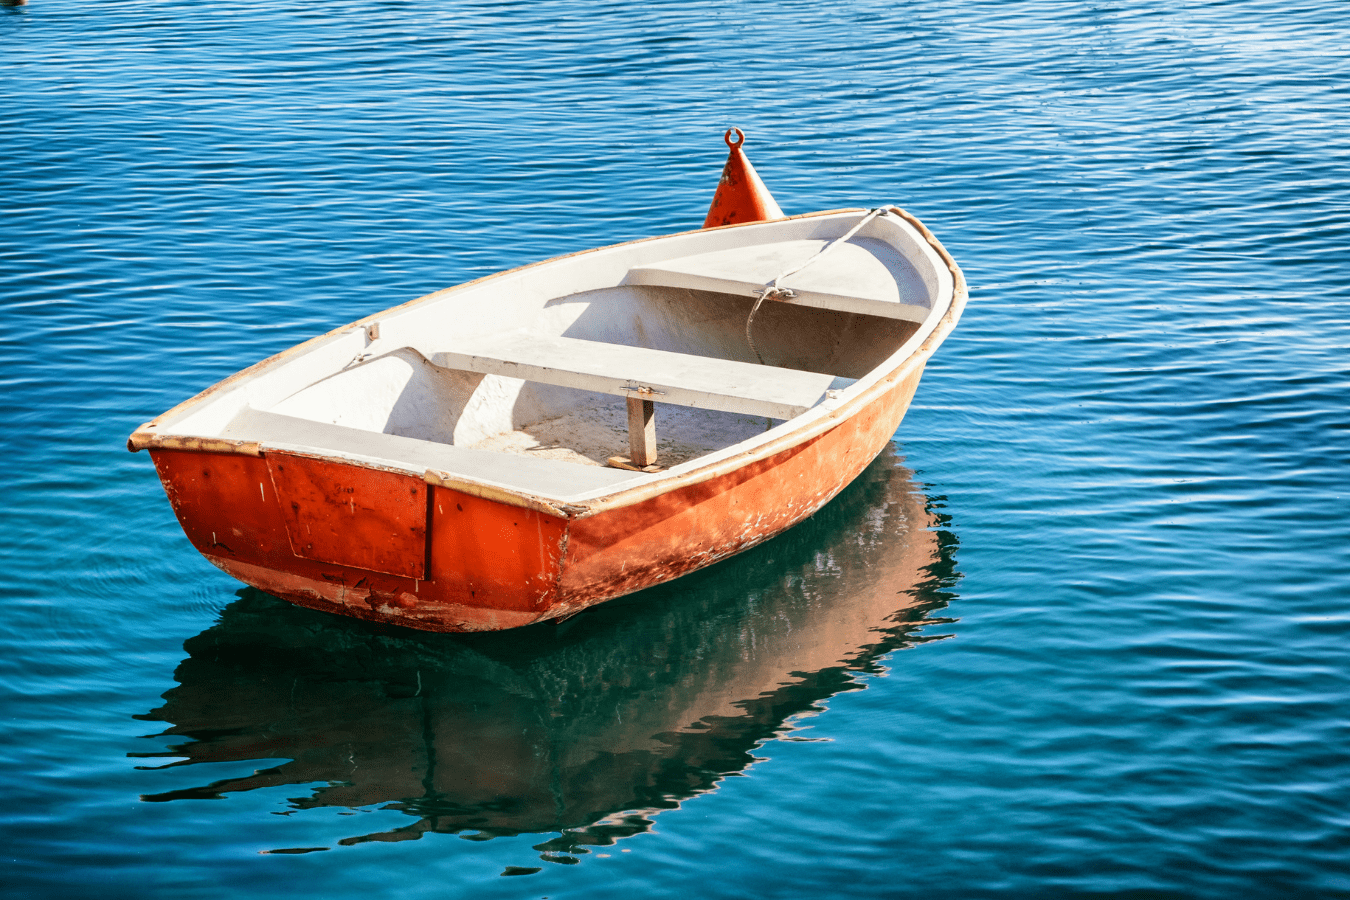 Dreaming of A Boat: What Does It Mean?